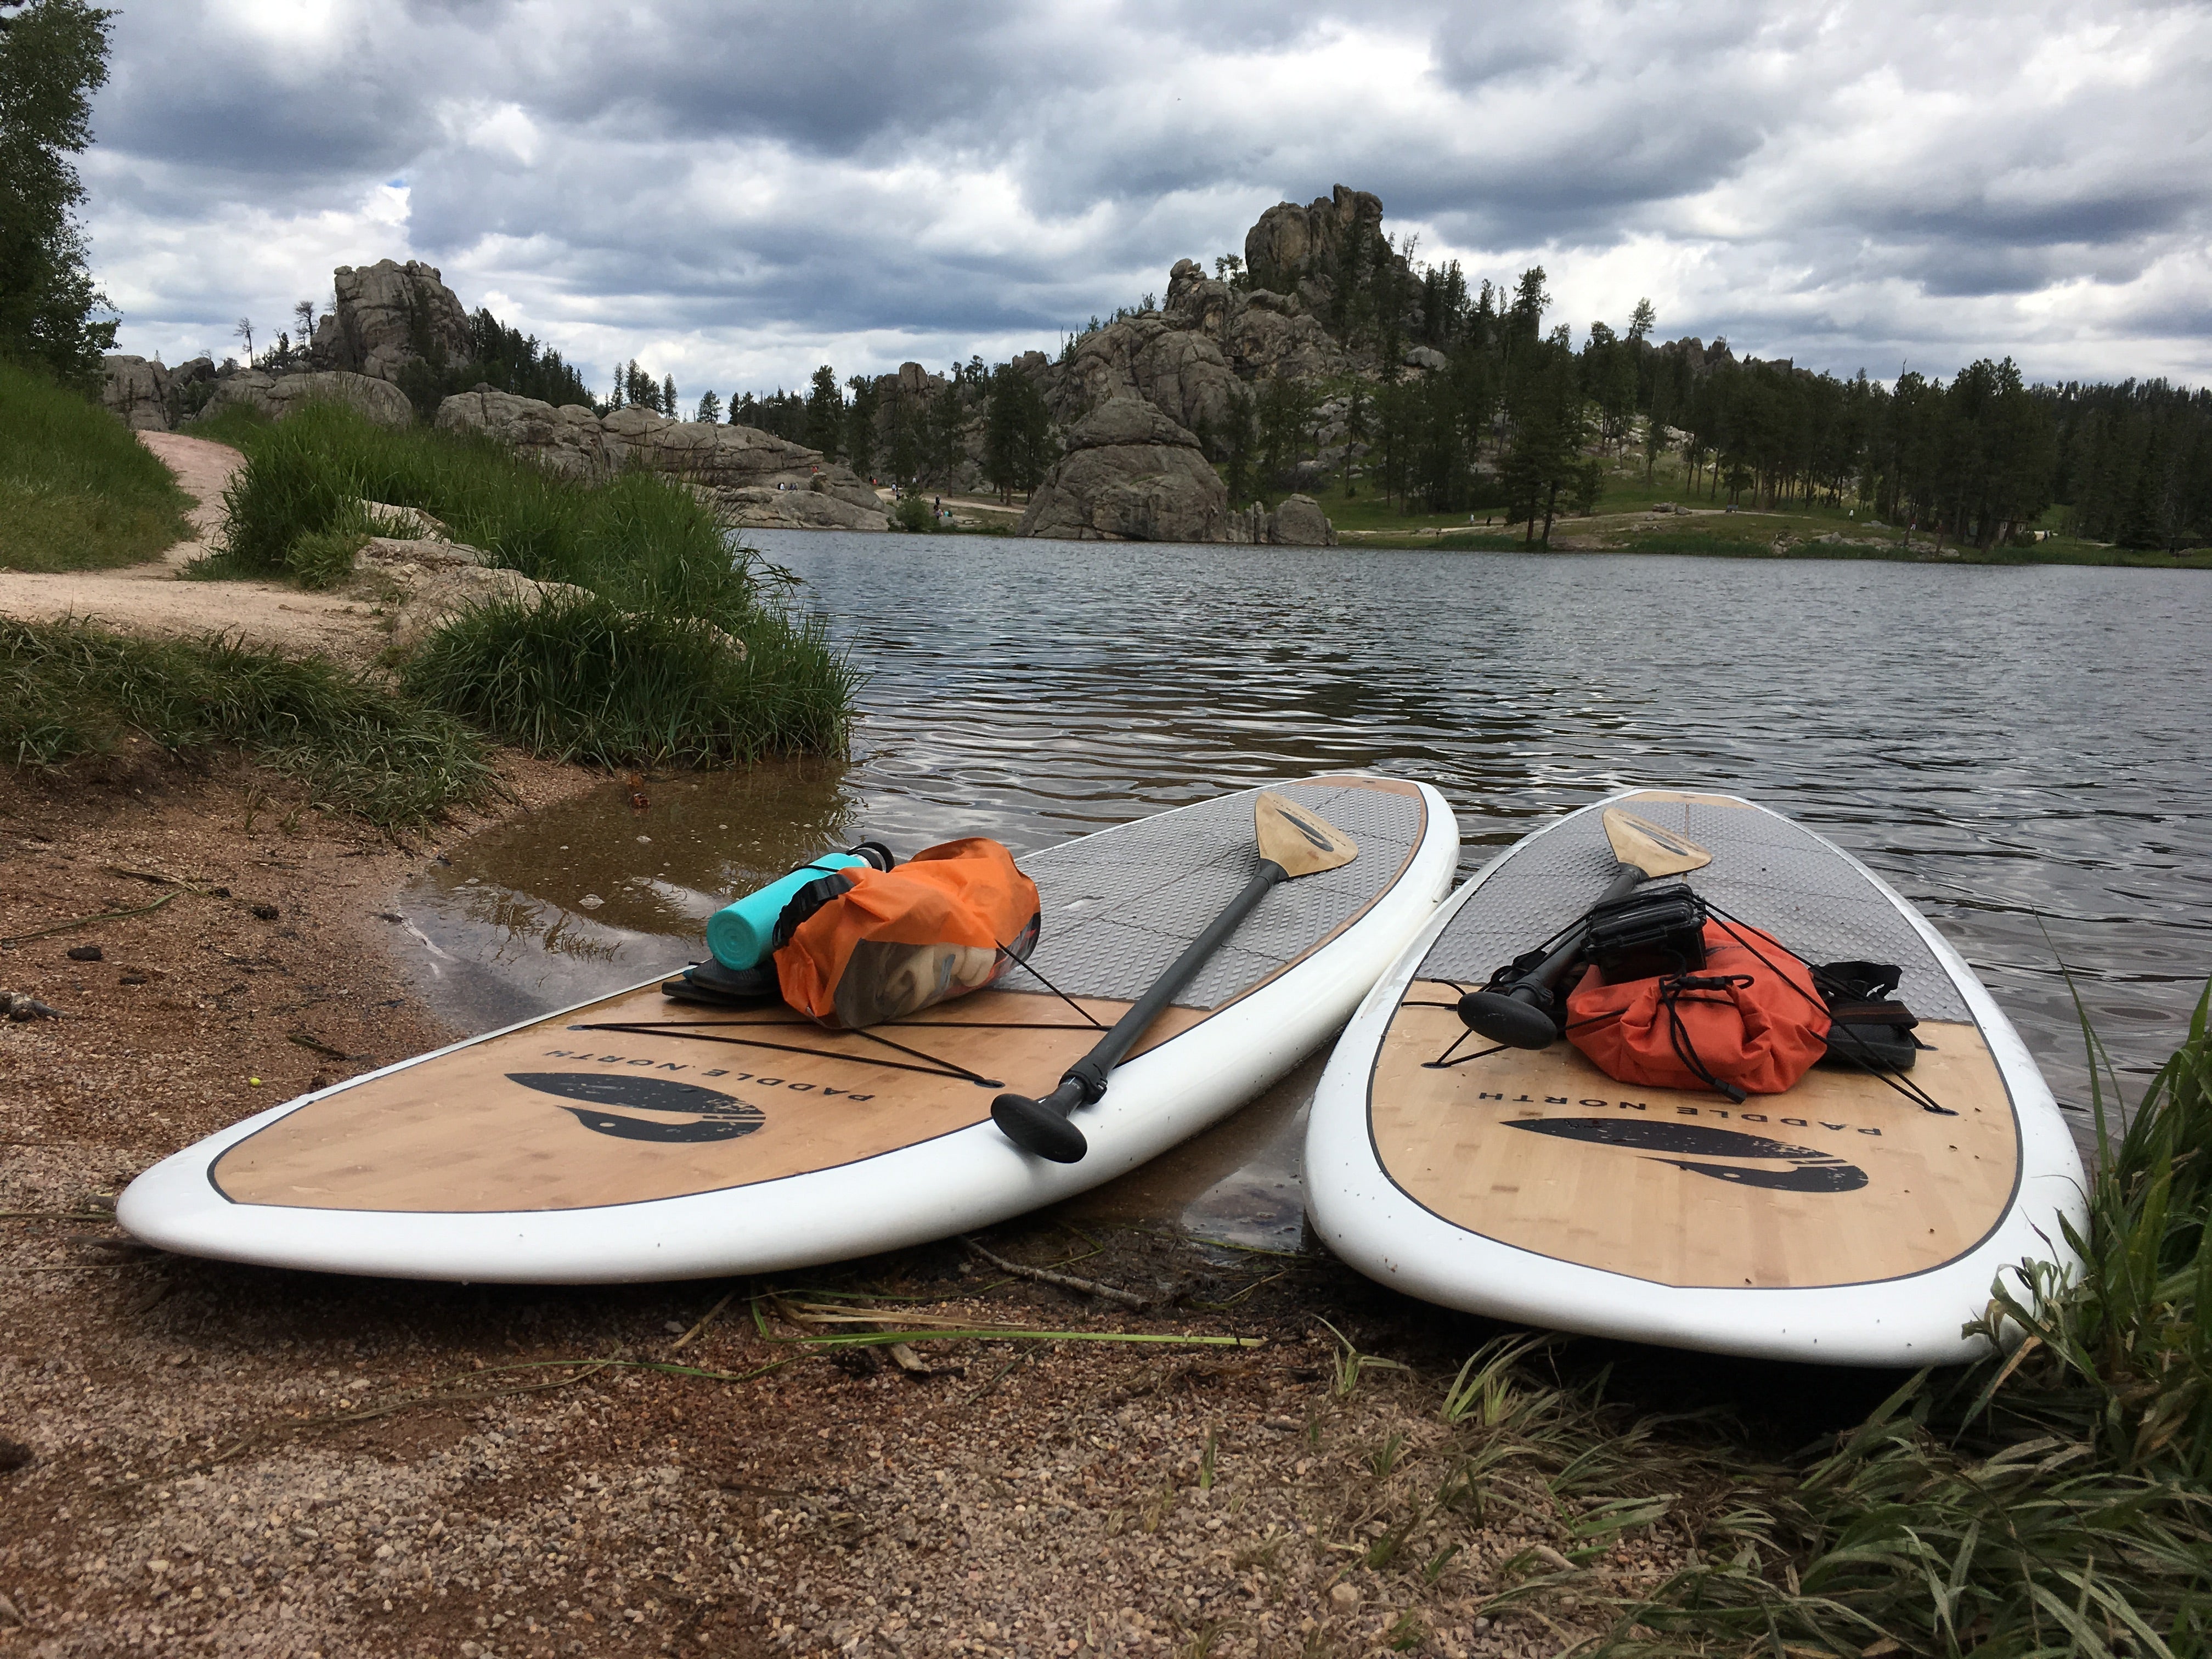 How Do I Store My SUP Board During The Off-season?